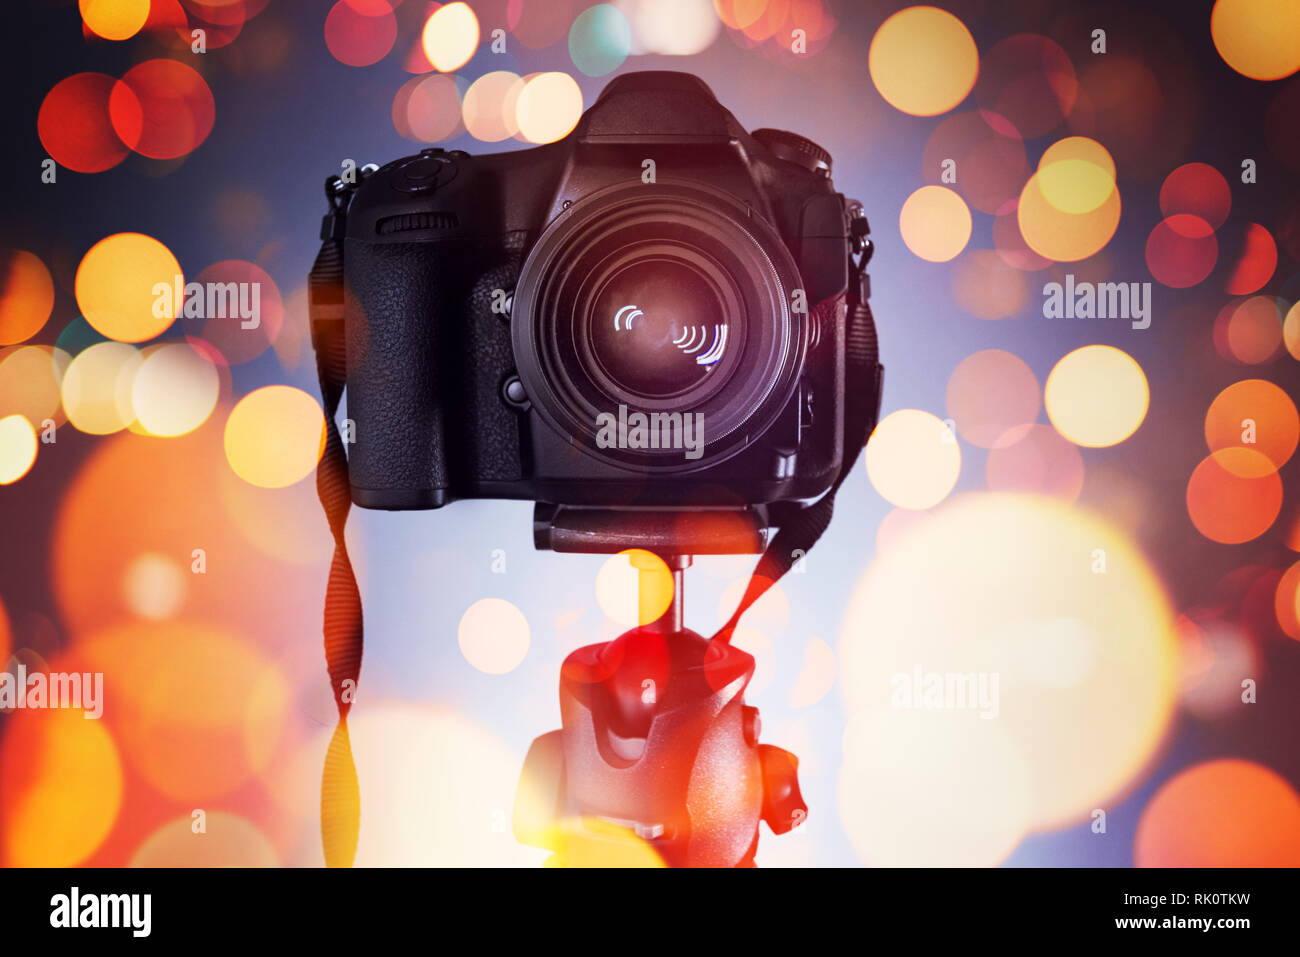 DSLR camera on tripod, photography and videography concept Stock Photo